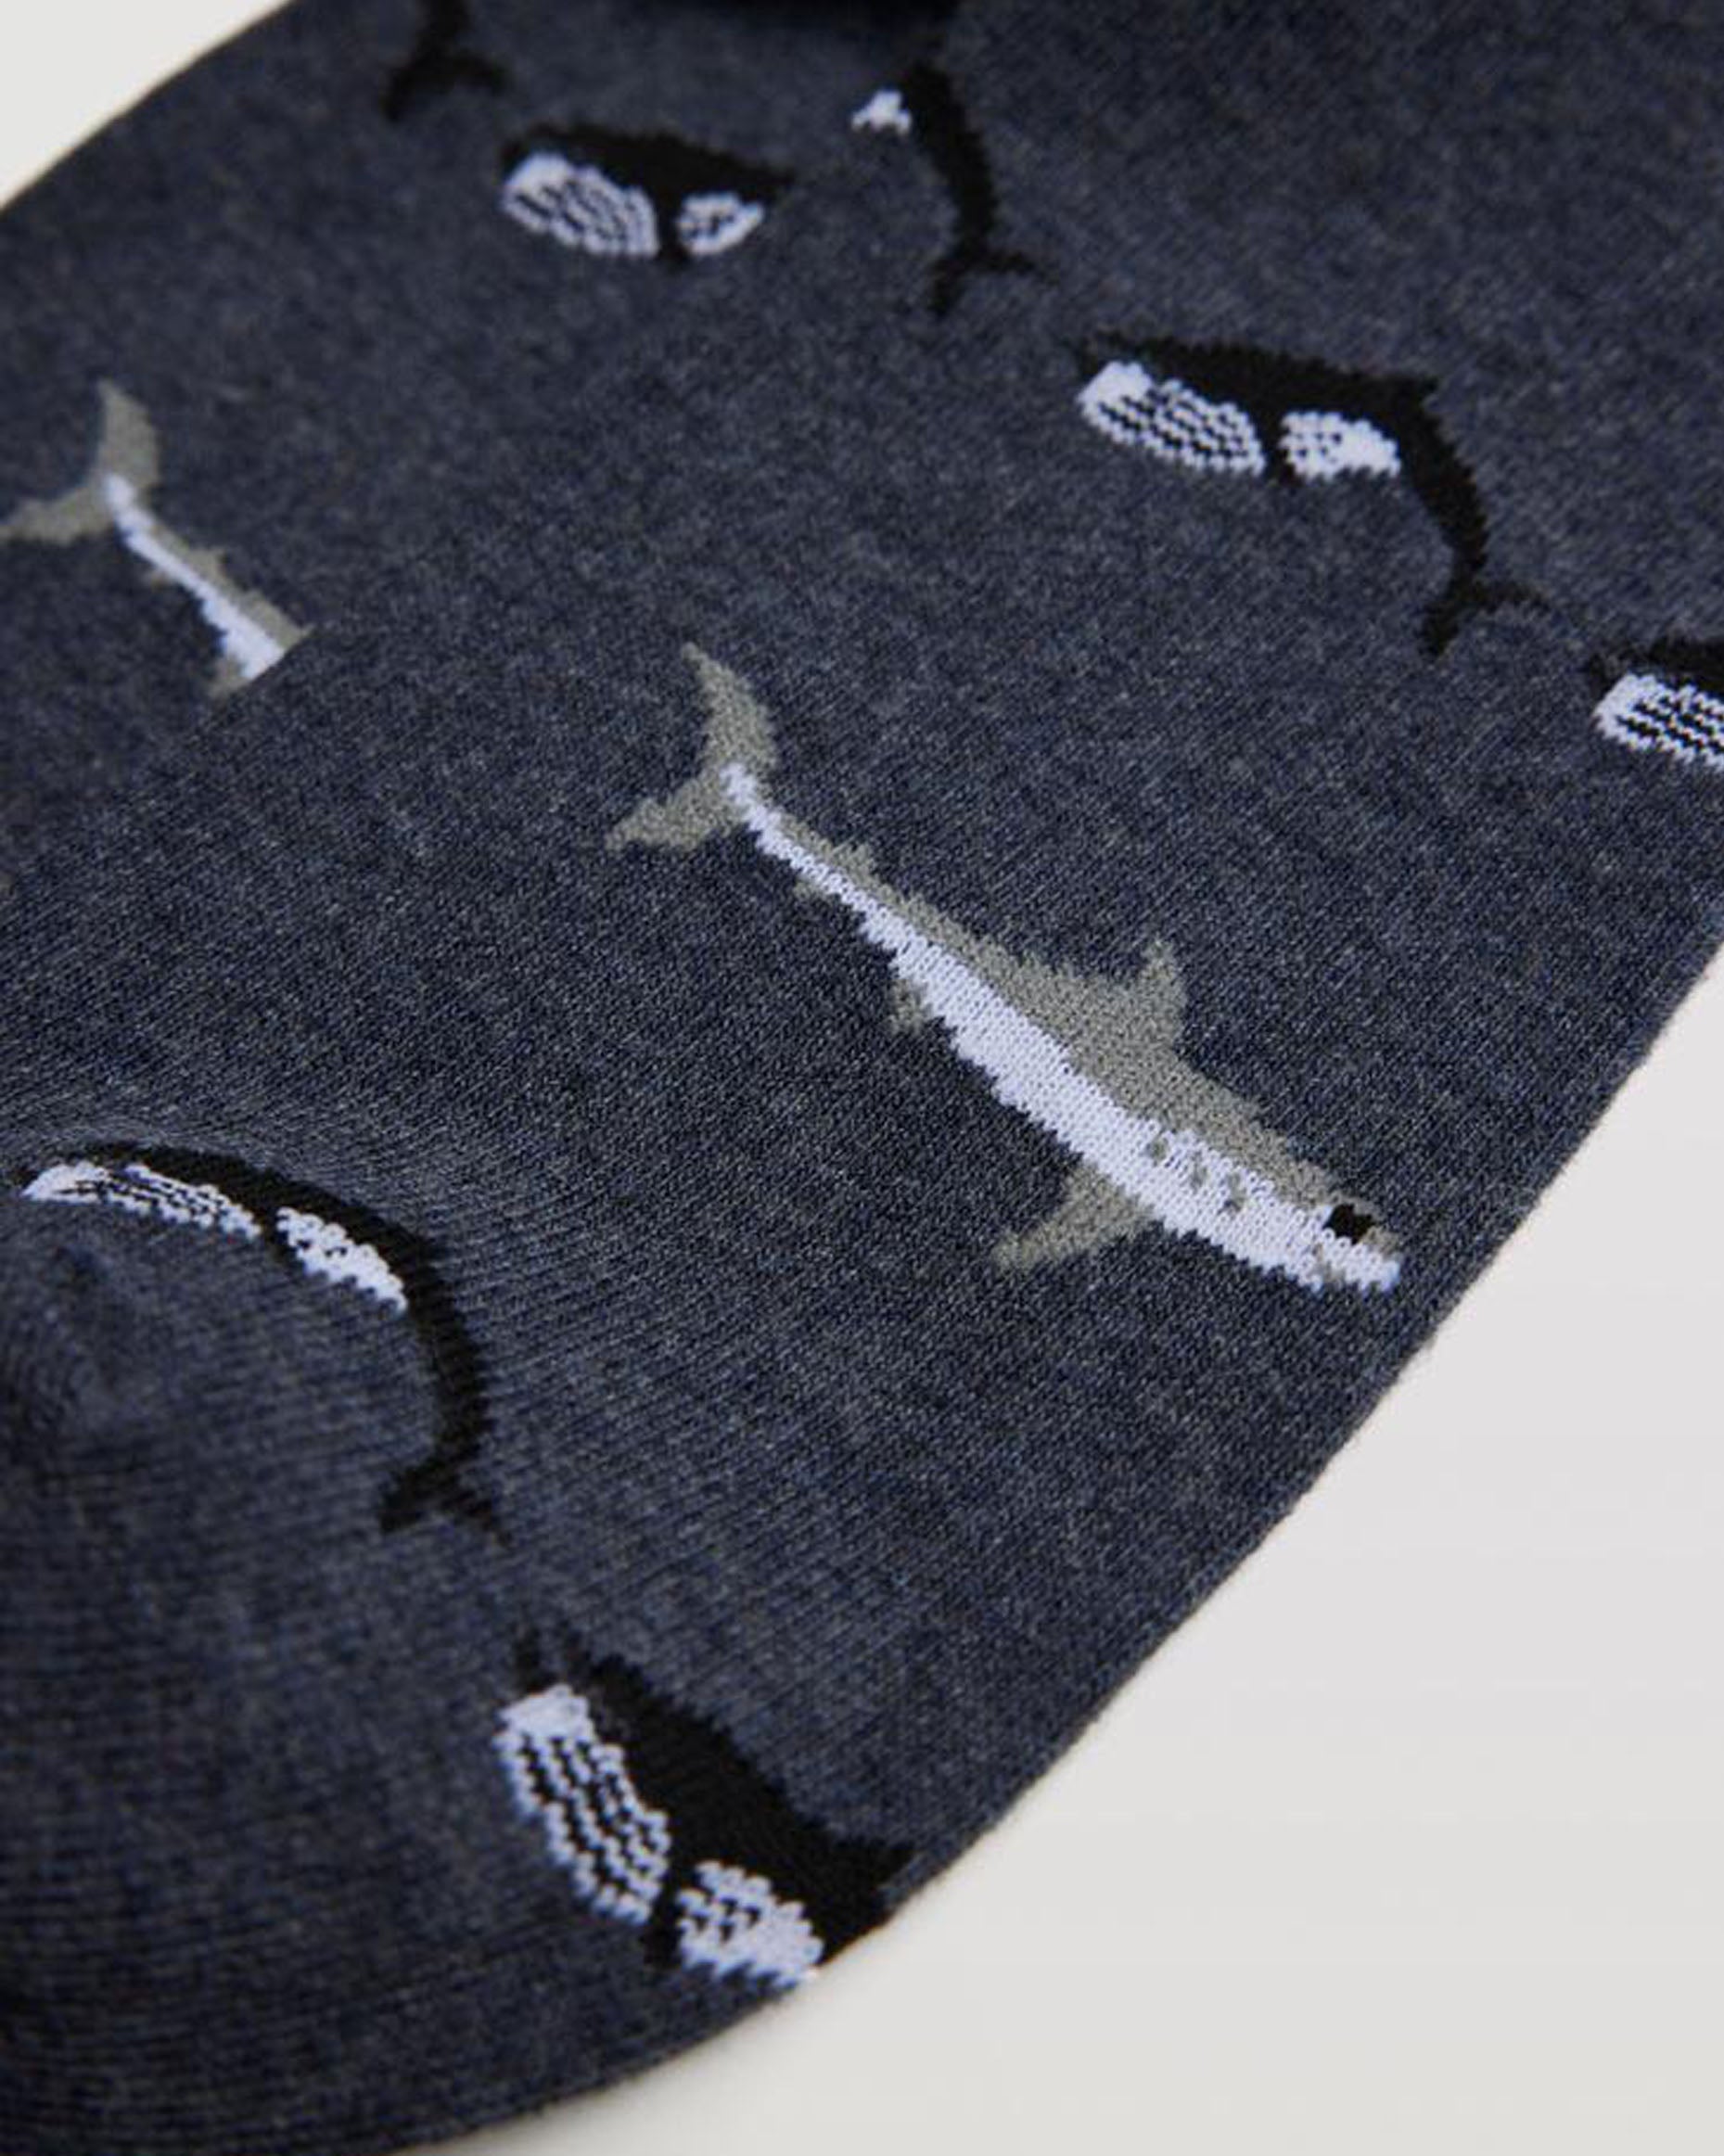 Ysabel Mora 22881 Shark Socks - Denim blue no cuff cotton mix crew length ankle socks with wales and sharks pattern.